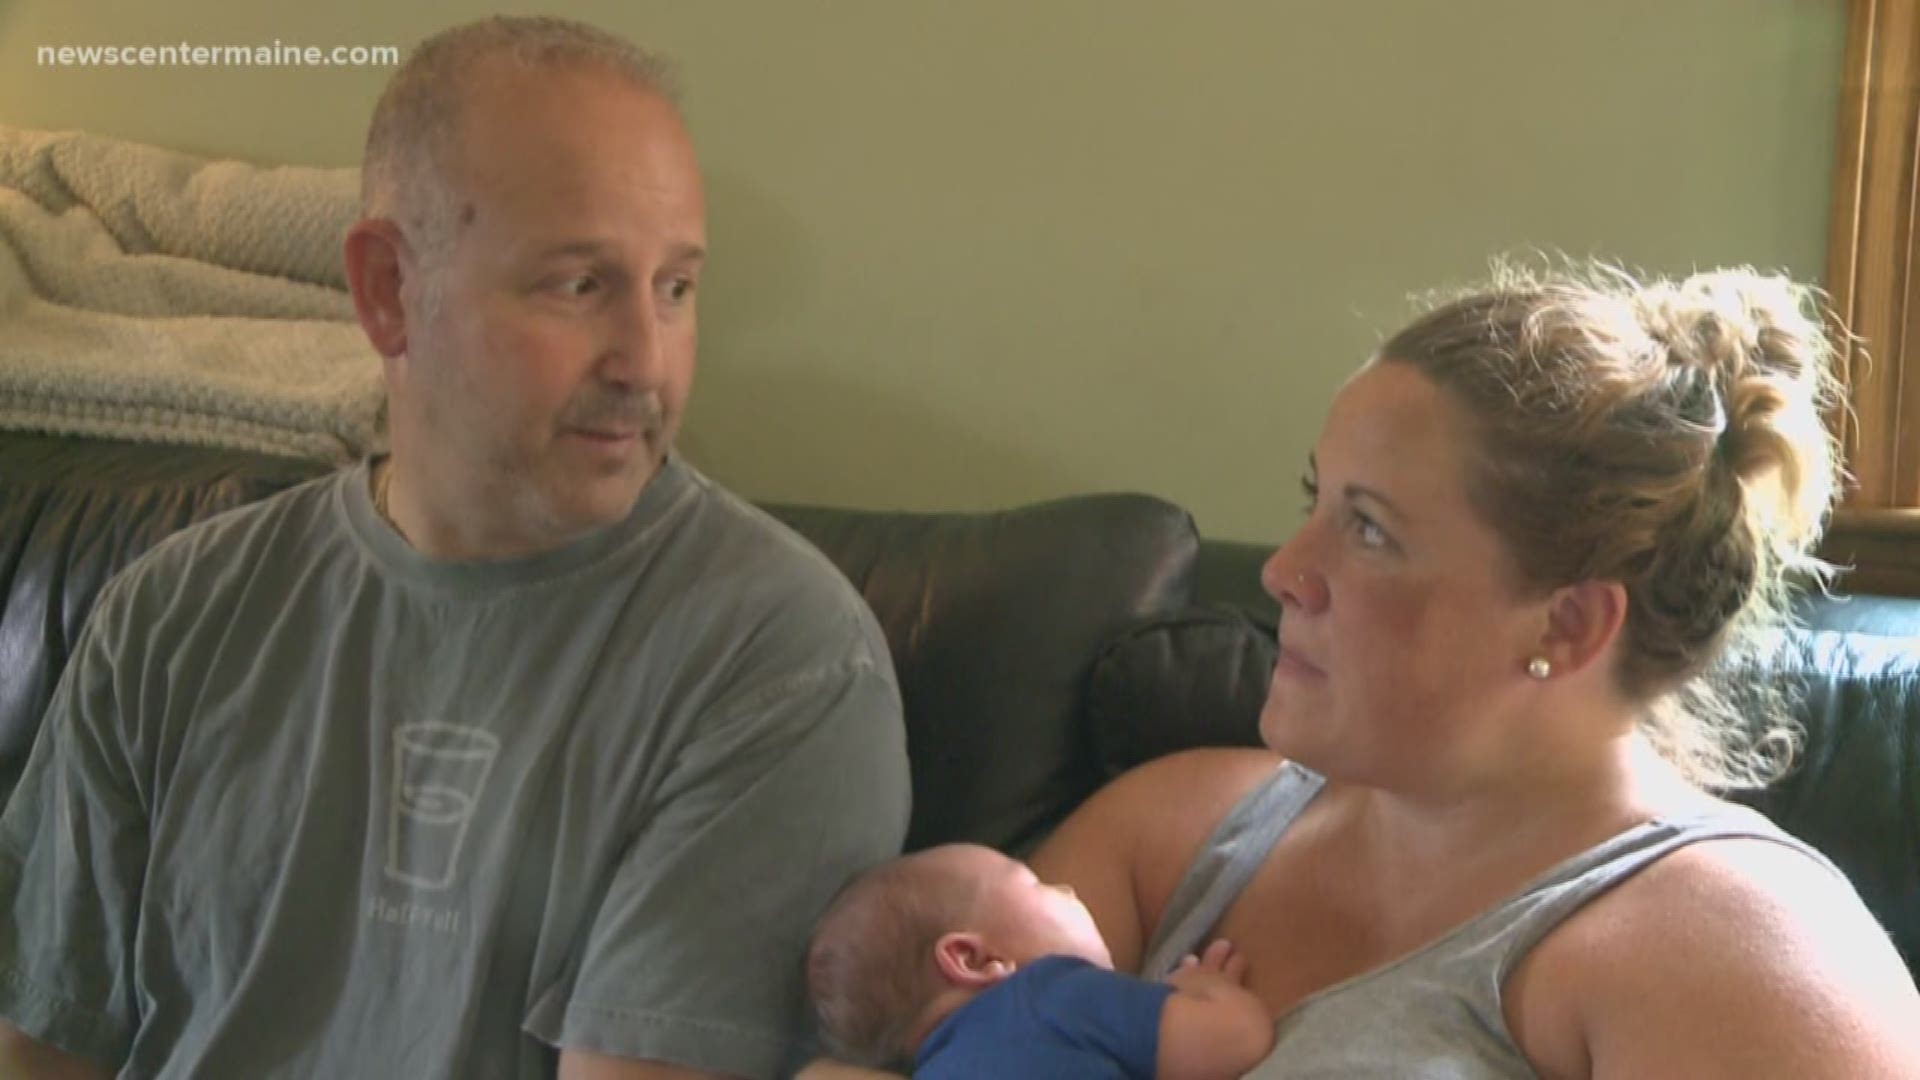 NOW: Lee Goldberg, wife welcome new child in viral fashion